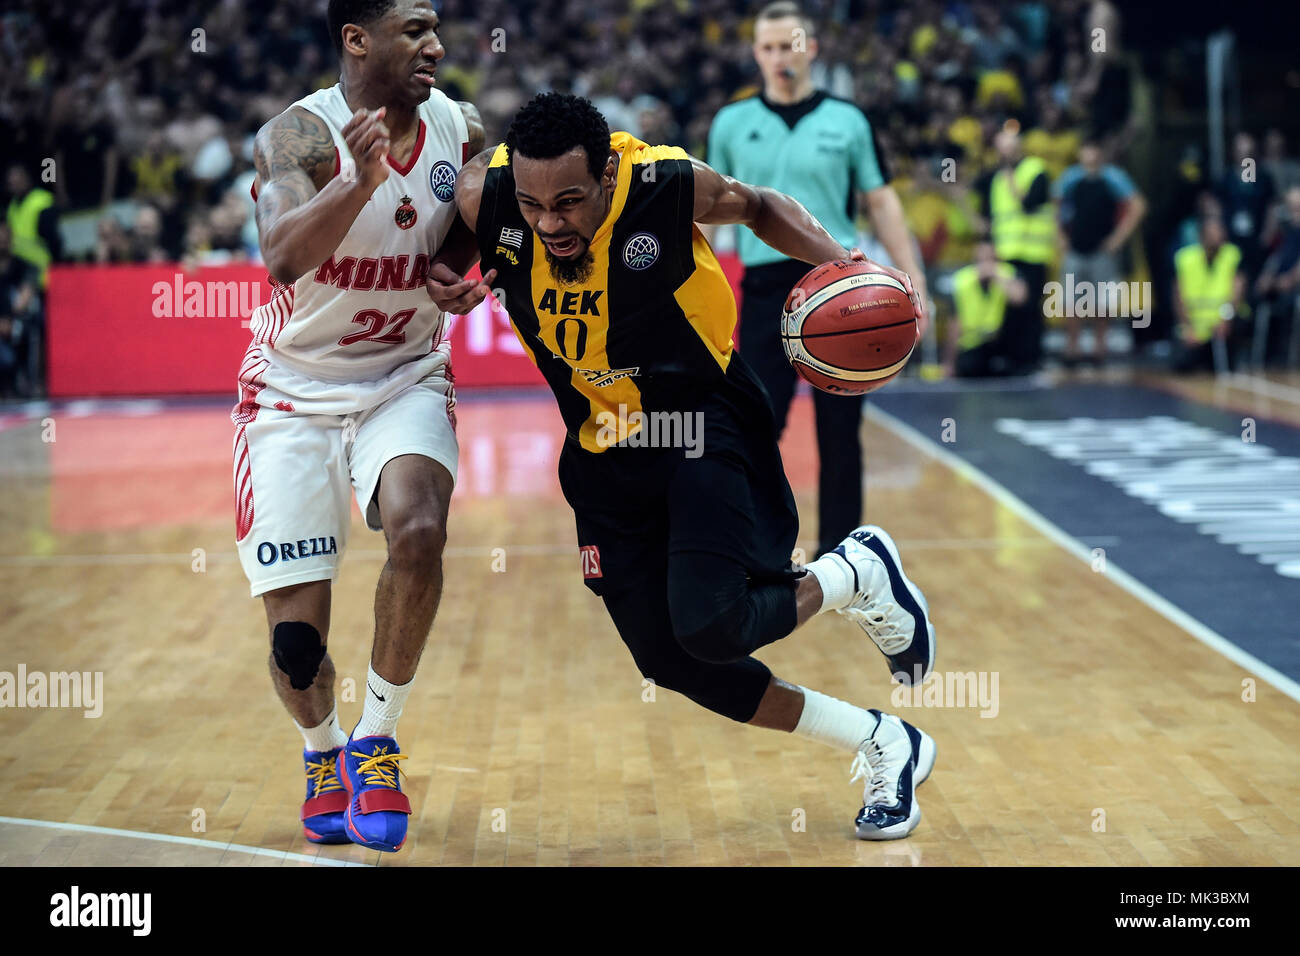 06 May 2018, Greece, Athens: Basketball, Champions League, AS Monaco vs AEK  Athens, Final: Athens' Kevin Punter (R) in action against Monaco's Gerald  Robinson. Photo: Angelos Tzortzinis/dpa Stock Photo - Alamy